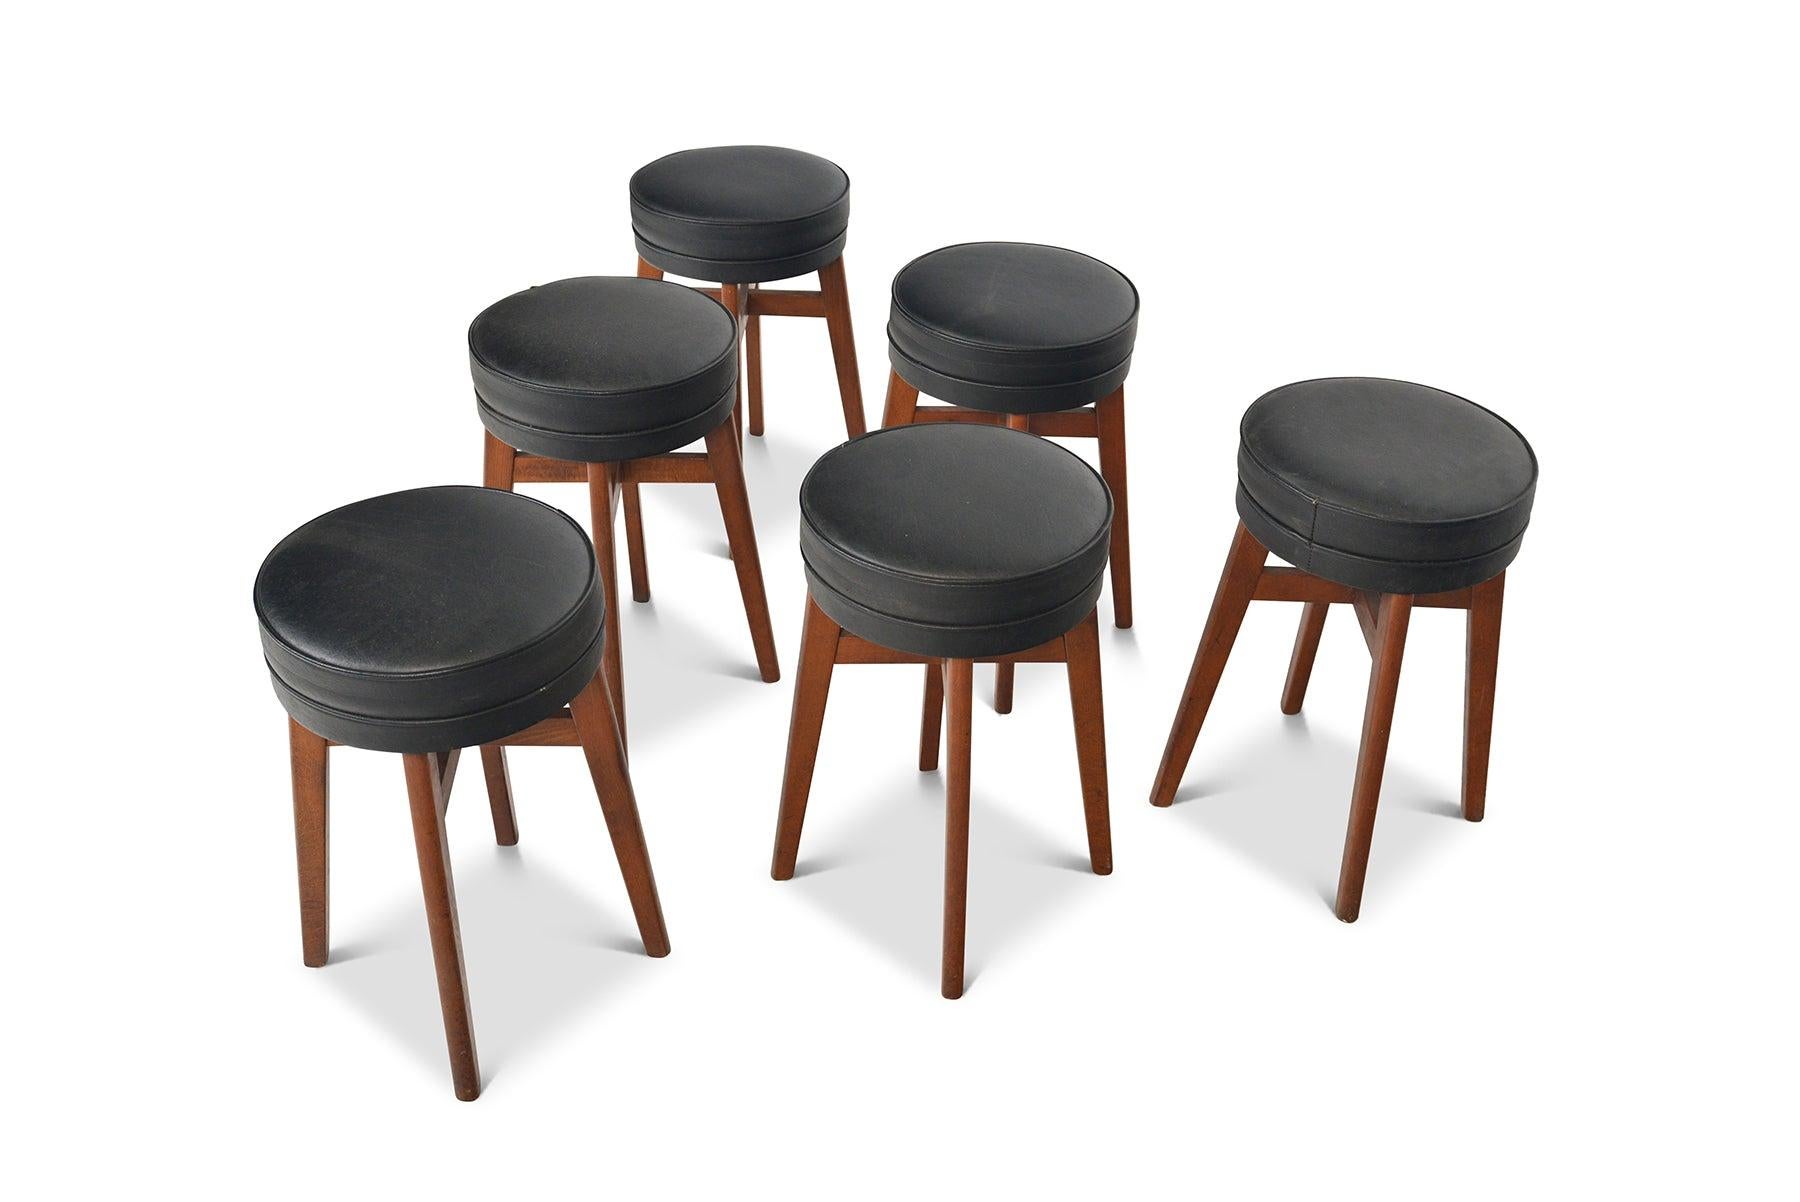 Set of Six English Modern Dining Stools in Teak In Excellent Condition For Sale In Berkeley, CA